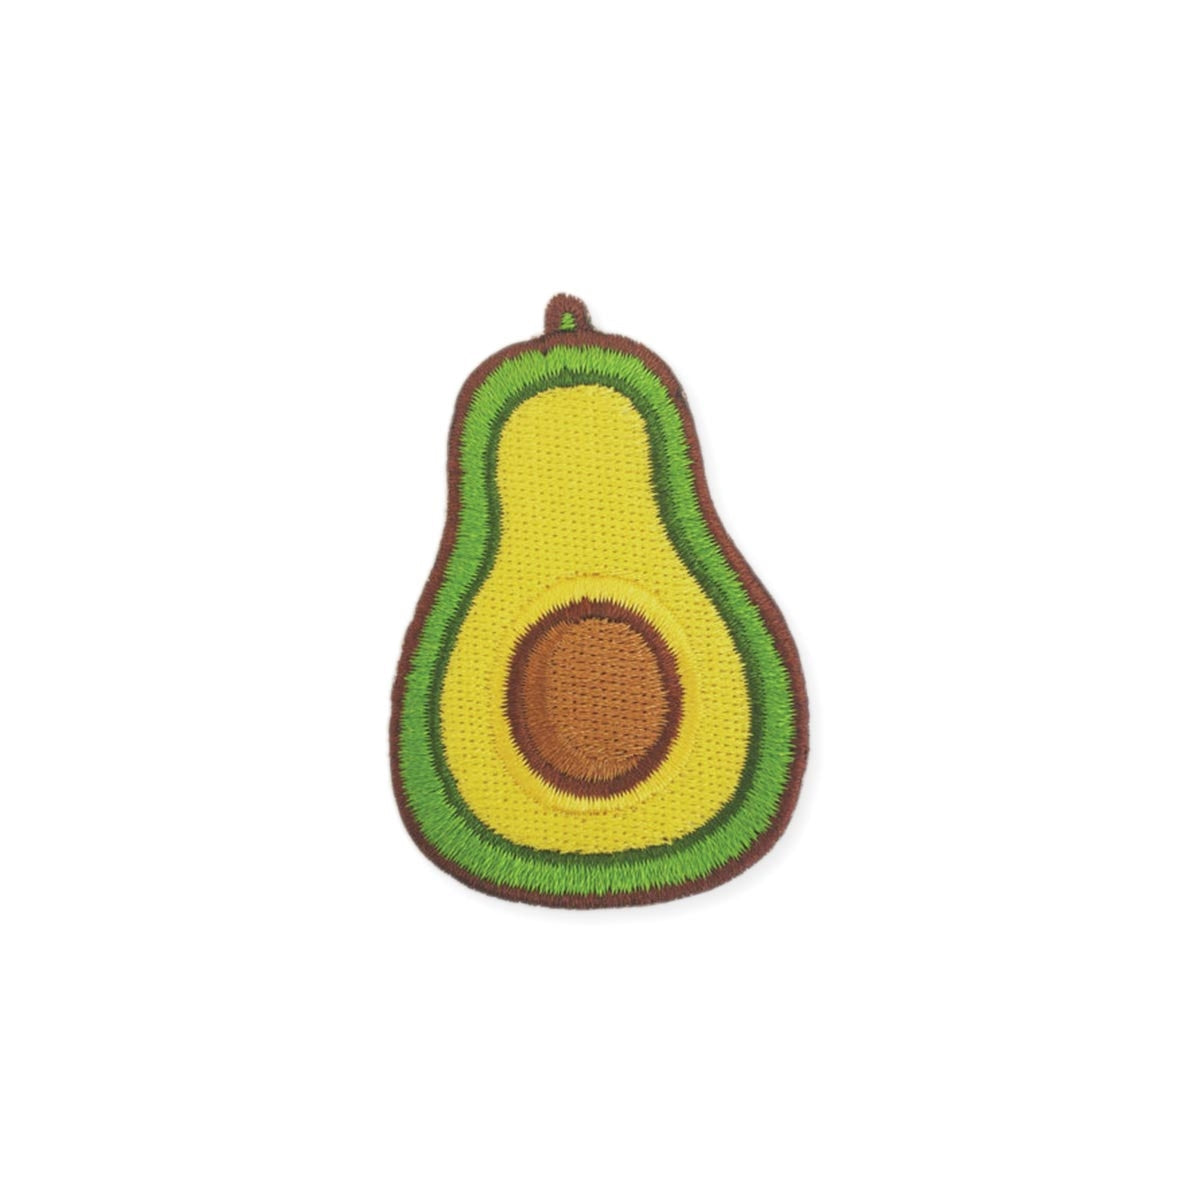 2 3/4" green and brown embroidered patch showing interior view of a ripe avocado half